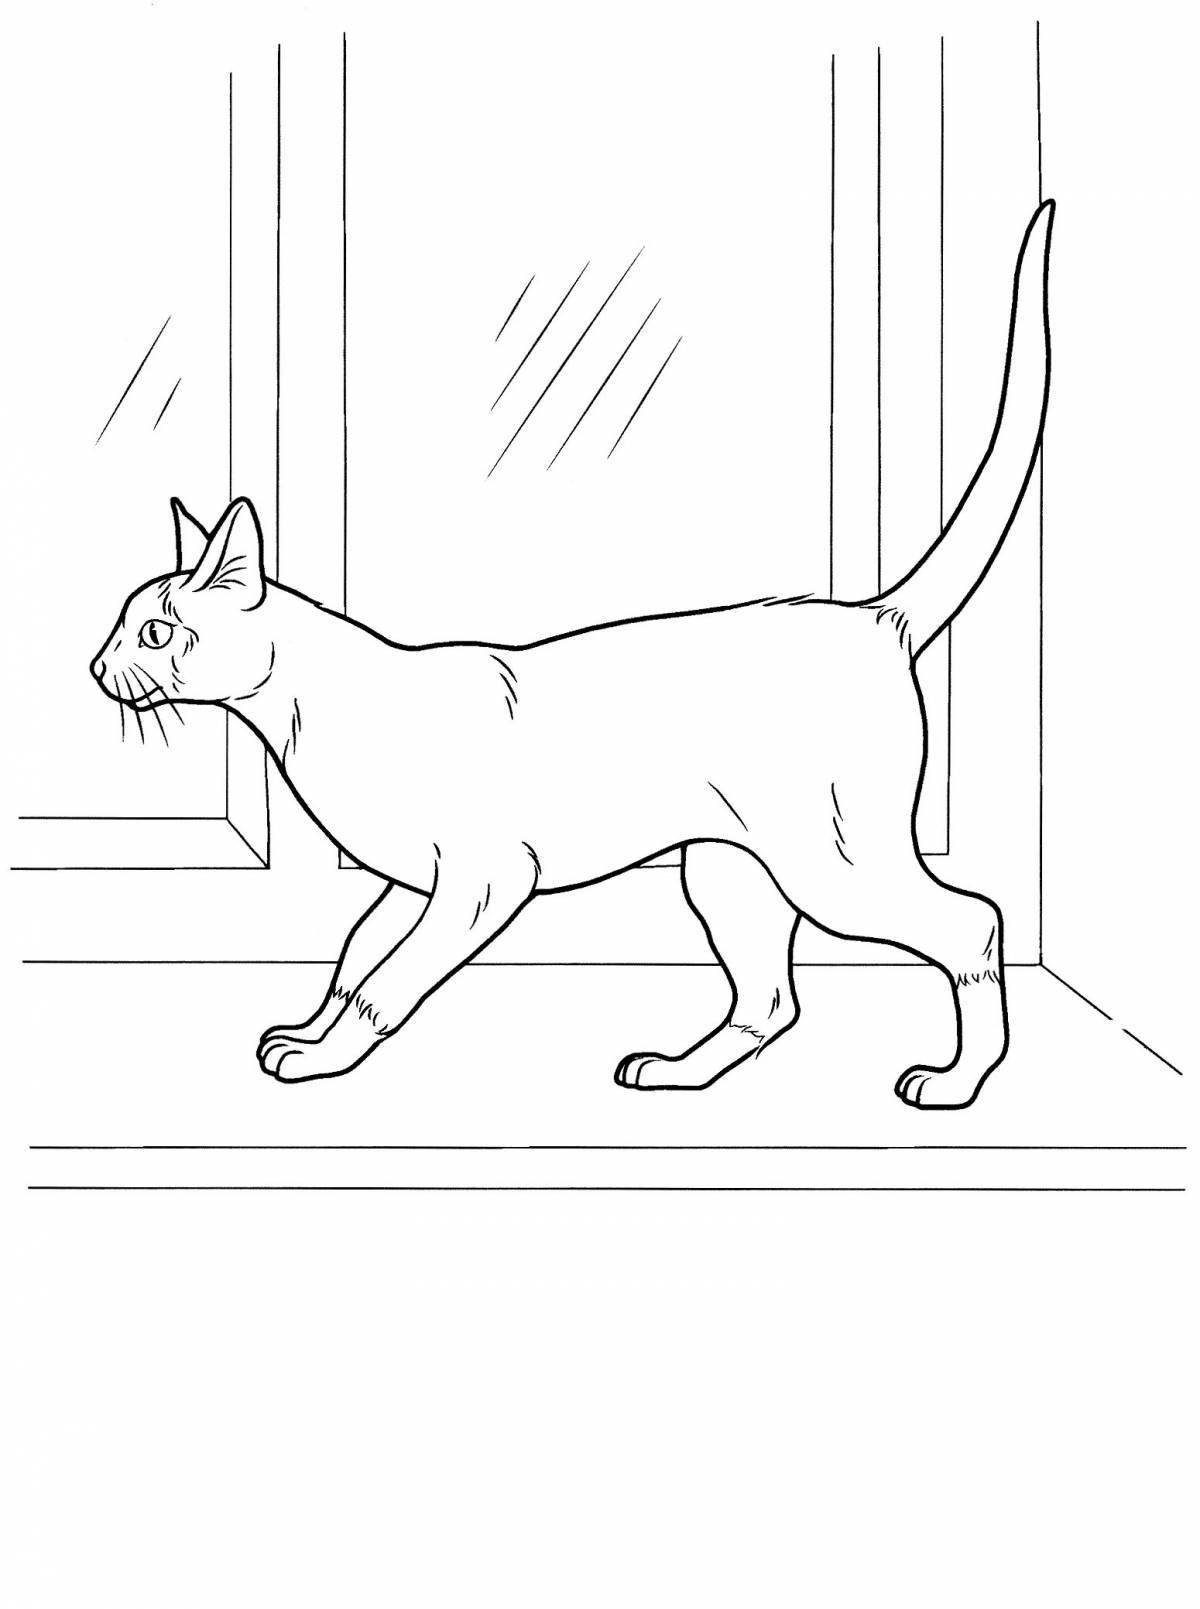 Coloring book funny sitting cat